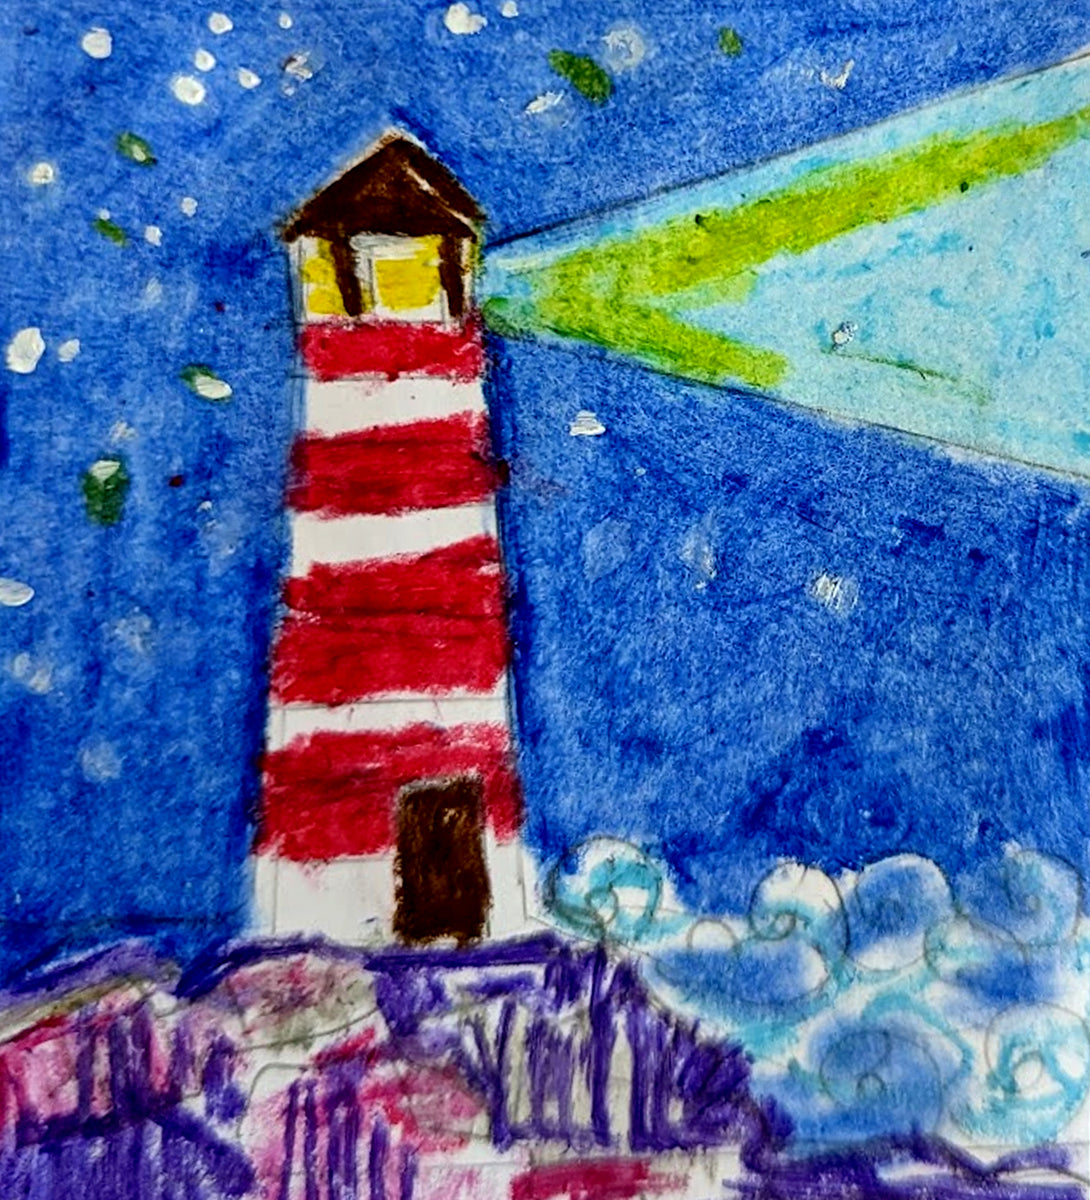 MAC School - Creative Kids - Lighthouse Create - July 25th - 1 PM - McMillan Arts Centre - McMillan Arts Centre Gallery, Gift Shop and Box Office - Vancouver Island Art Gallery